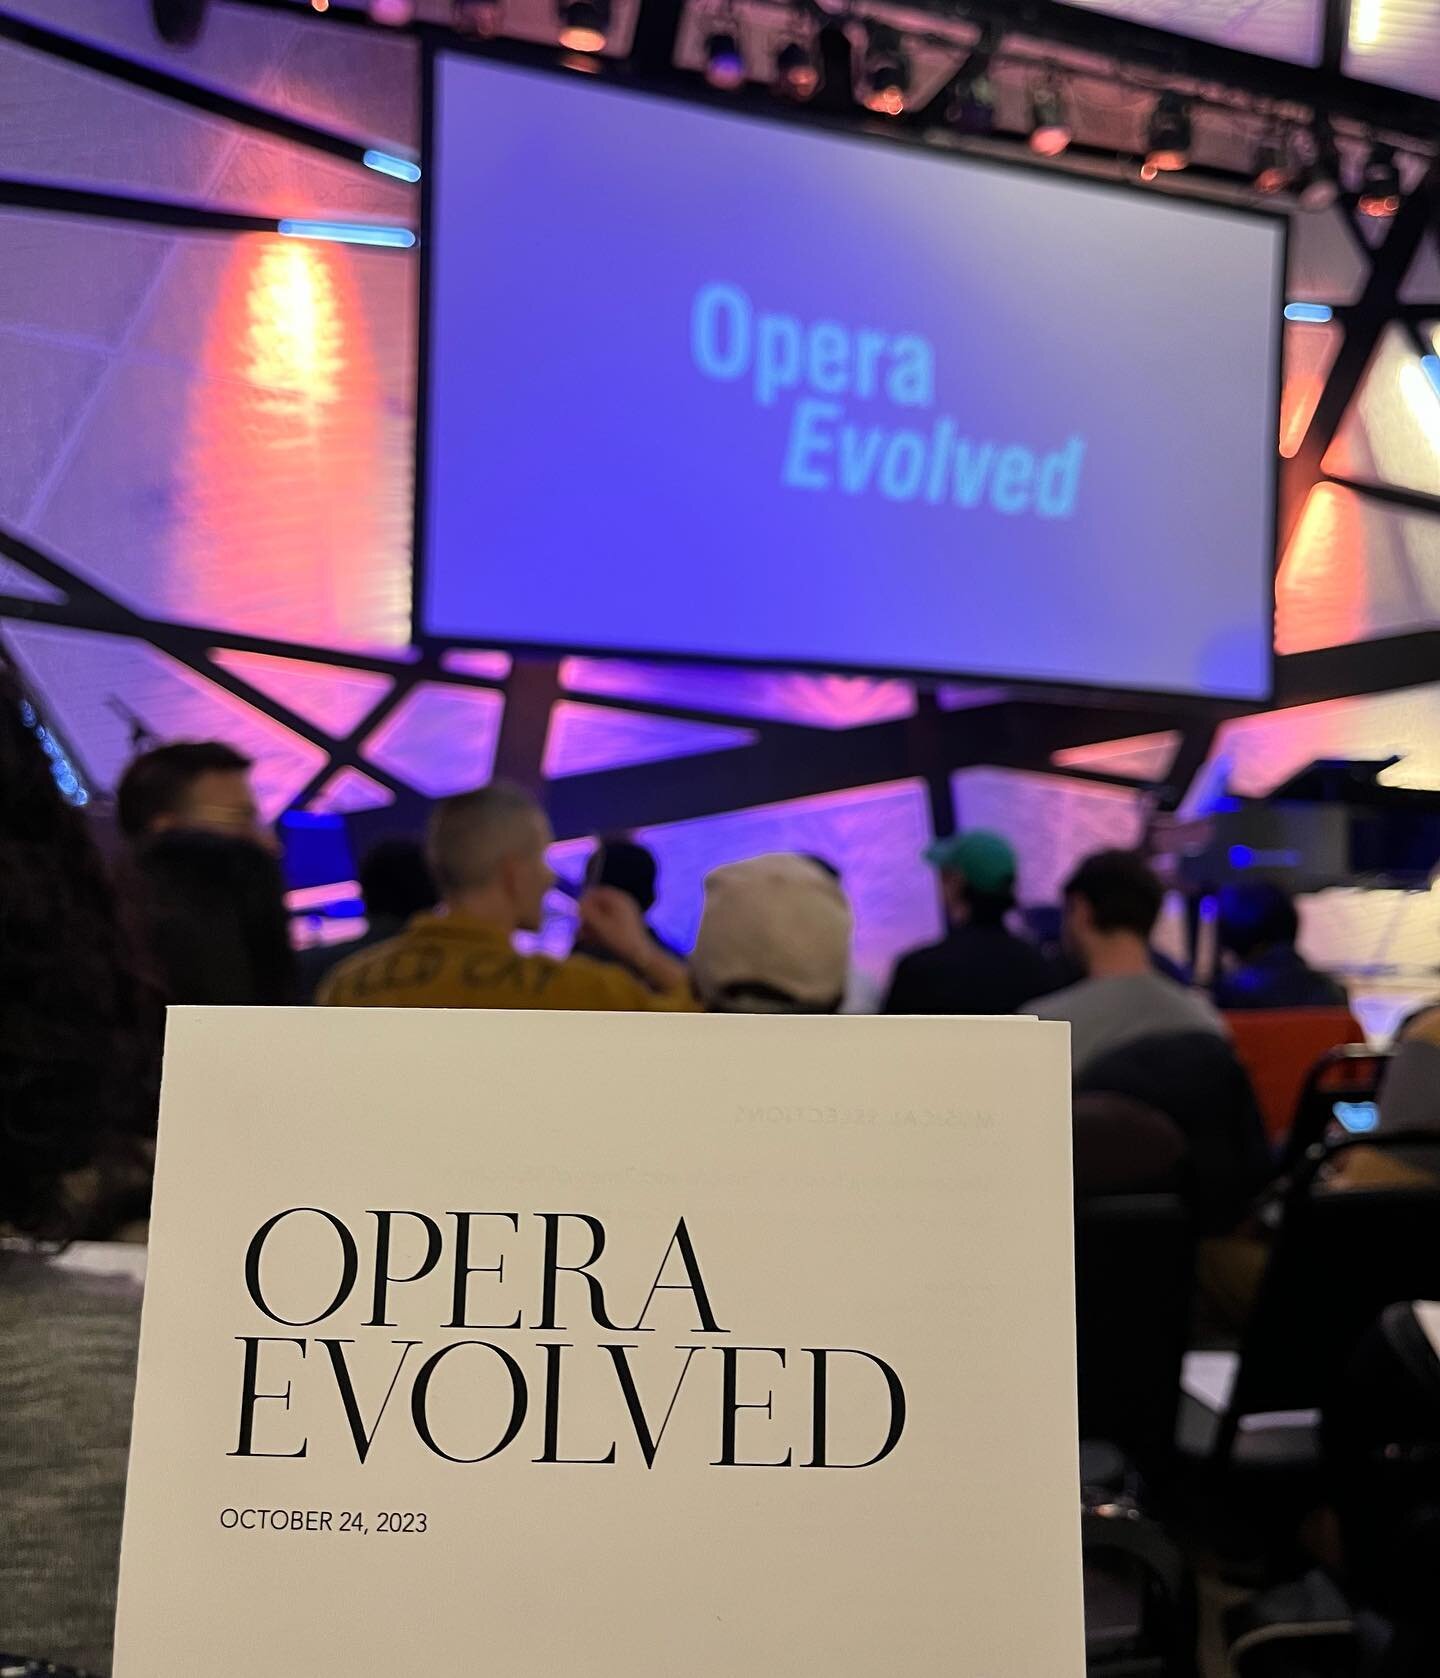 Late to the party but, in acknowledgment of World Opera Day, I wanted to express my gratitude to have attended the @metopera&rsquo;s &ldquo;Opera Evolved&rdquo; event at @nationalsawdust on Tuesday evening. 

My partner @that_bari_guy_bryan and I enj